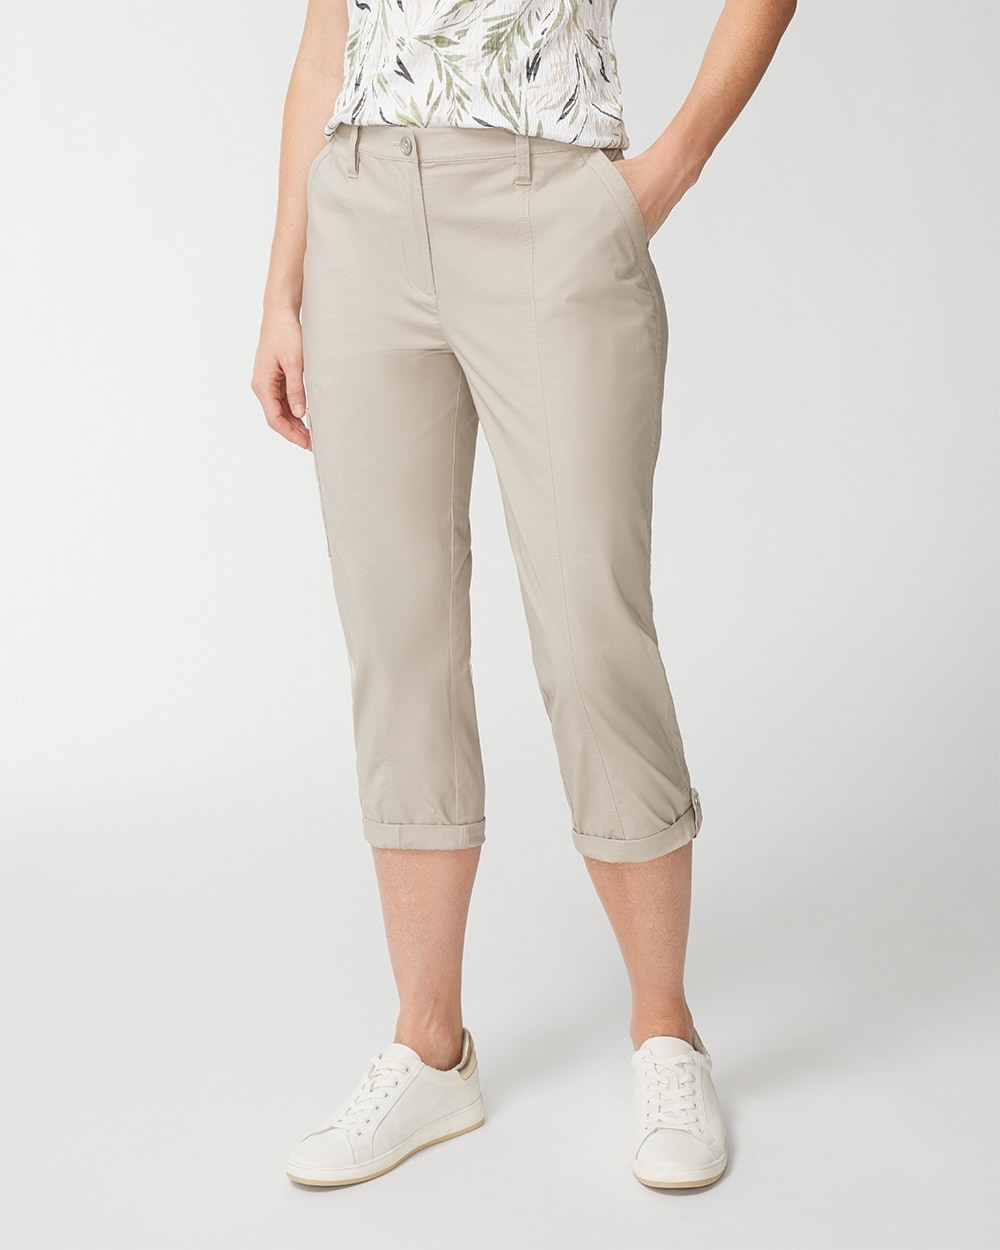 Fitigues Cargo Capri Pants - Chico's Off The Rack - Chico's Outlet